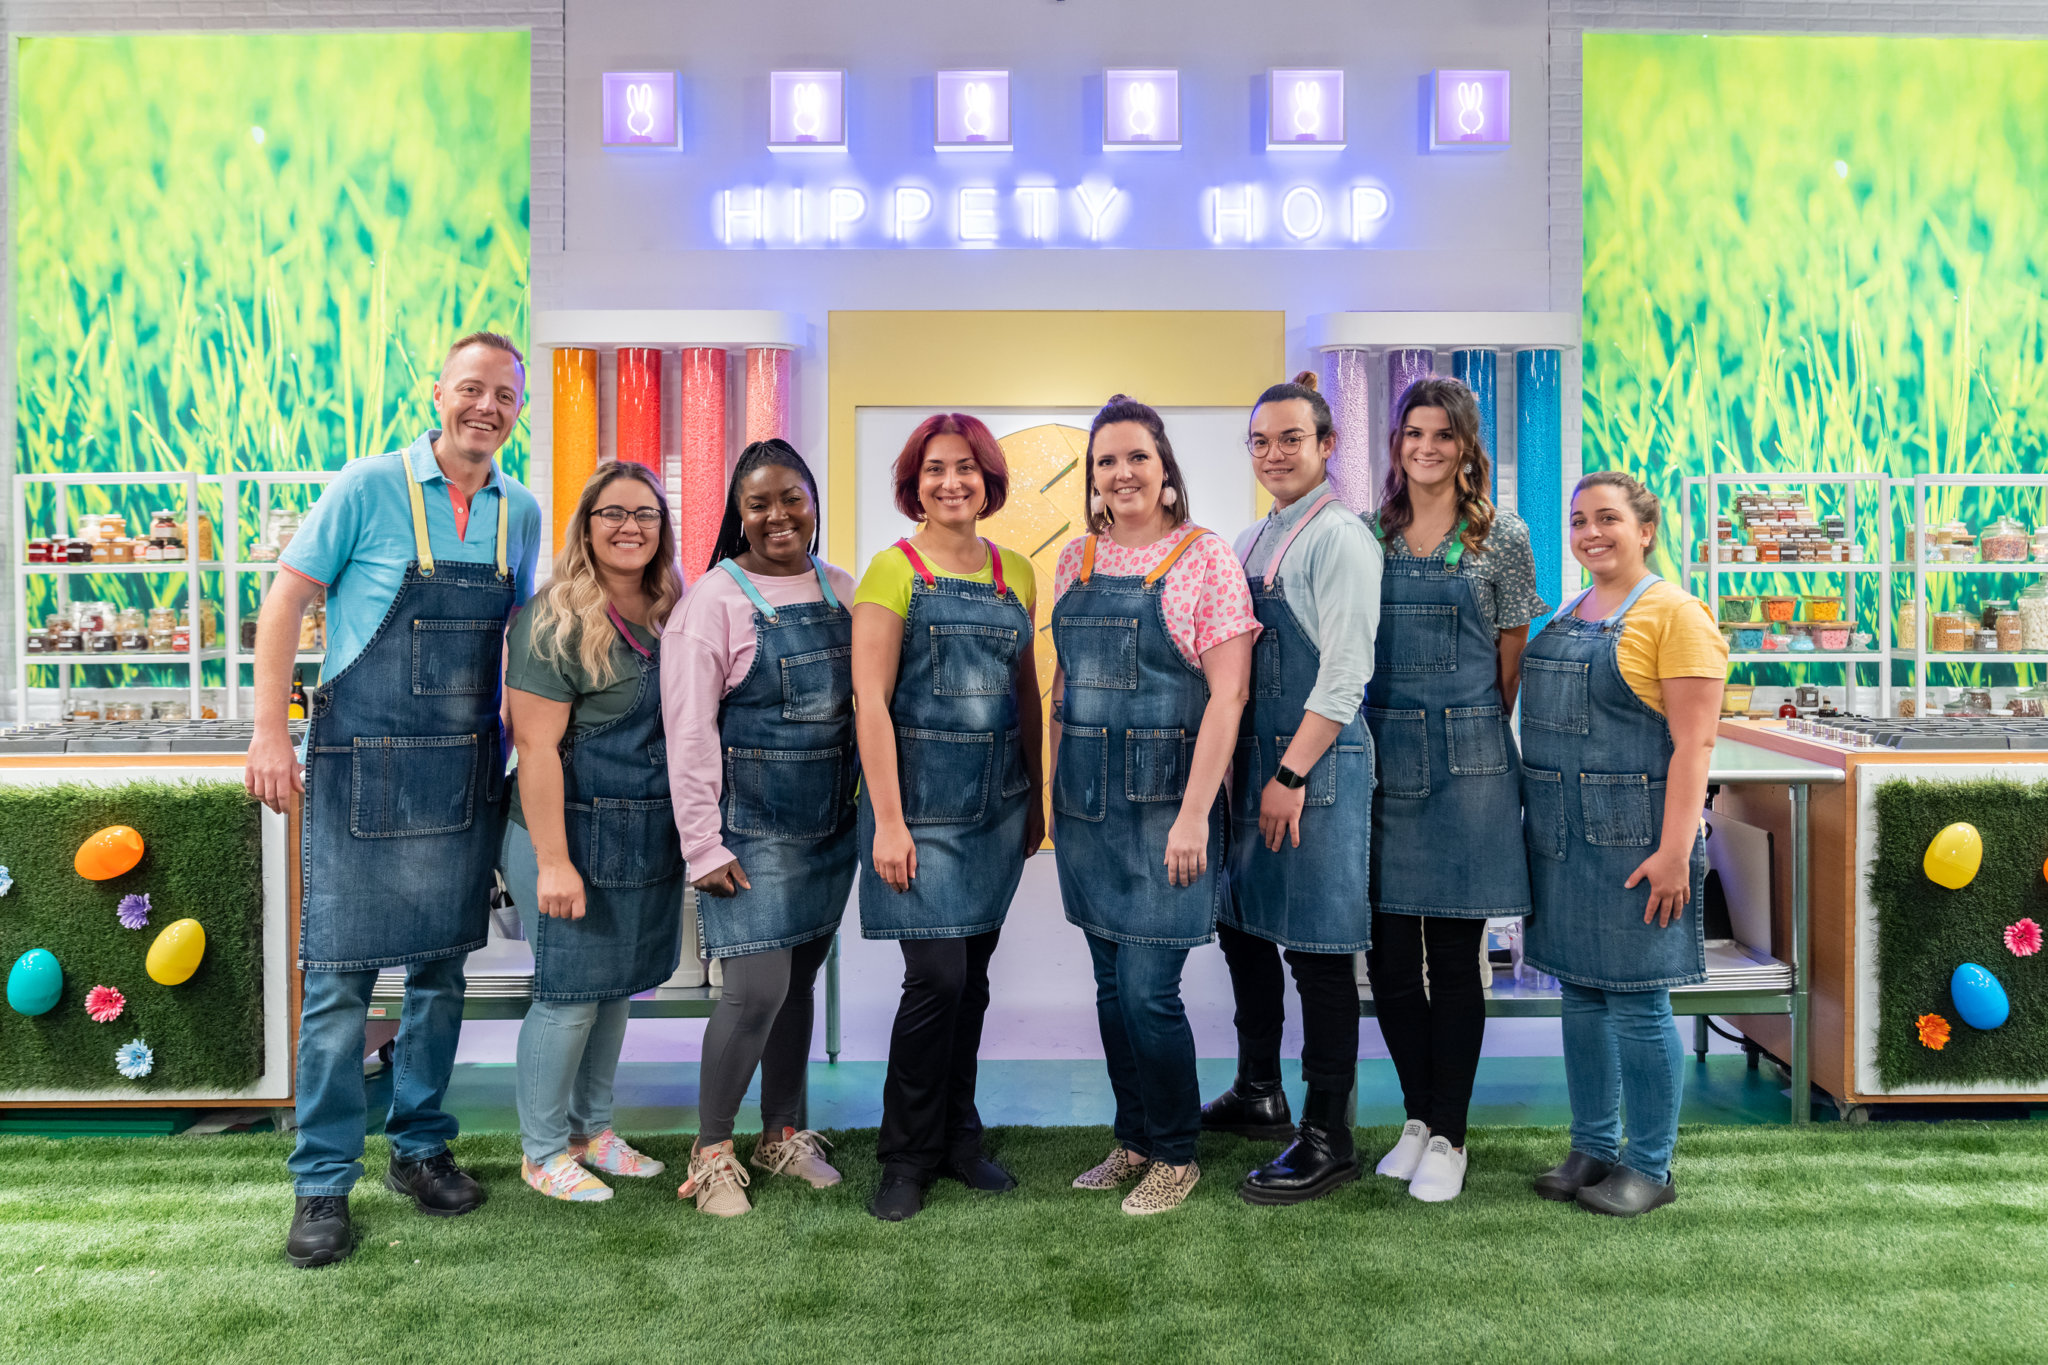 New York contestants compete to create elevated springtime treats in